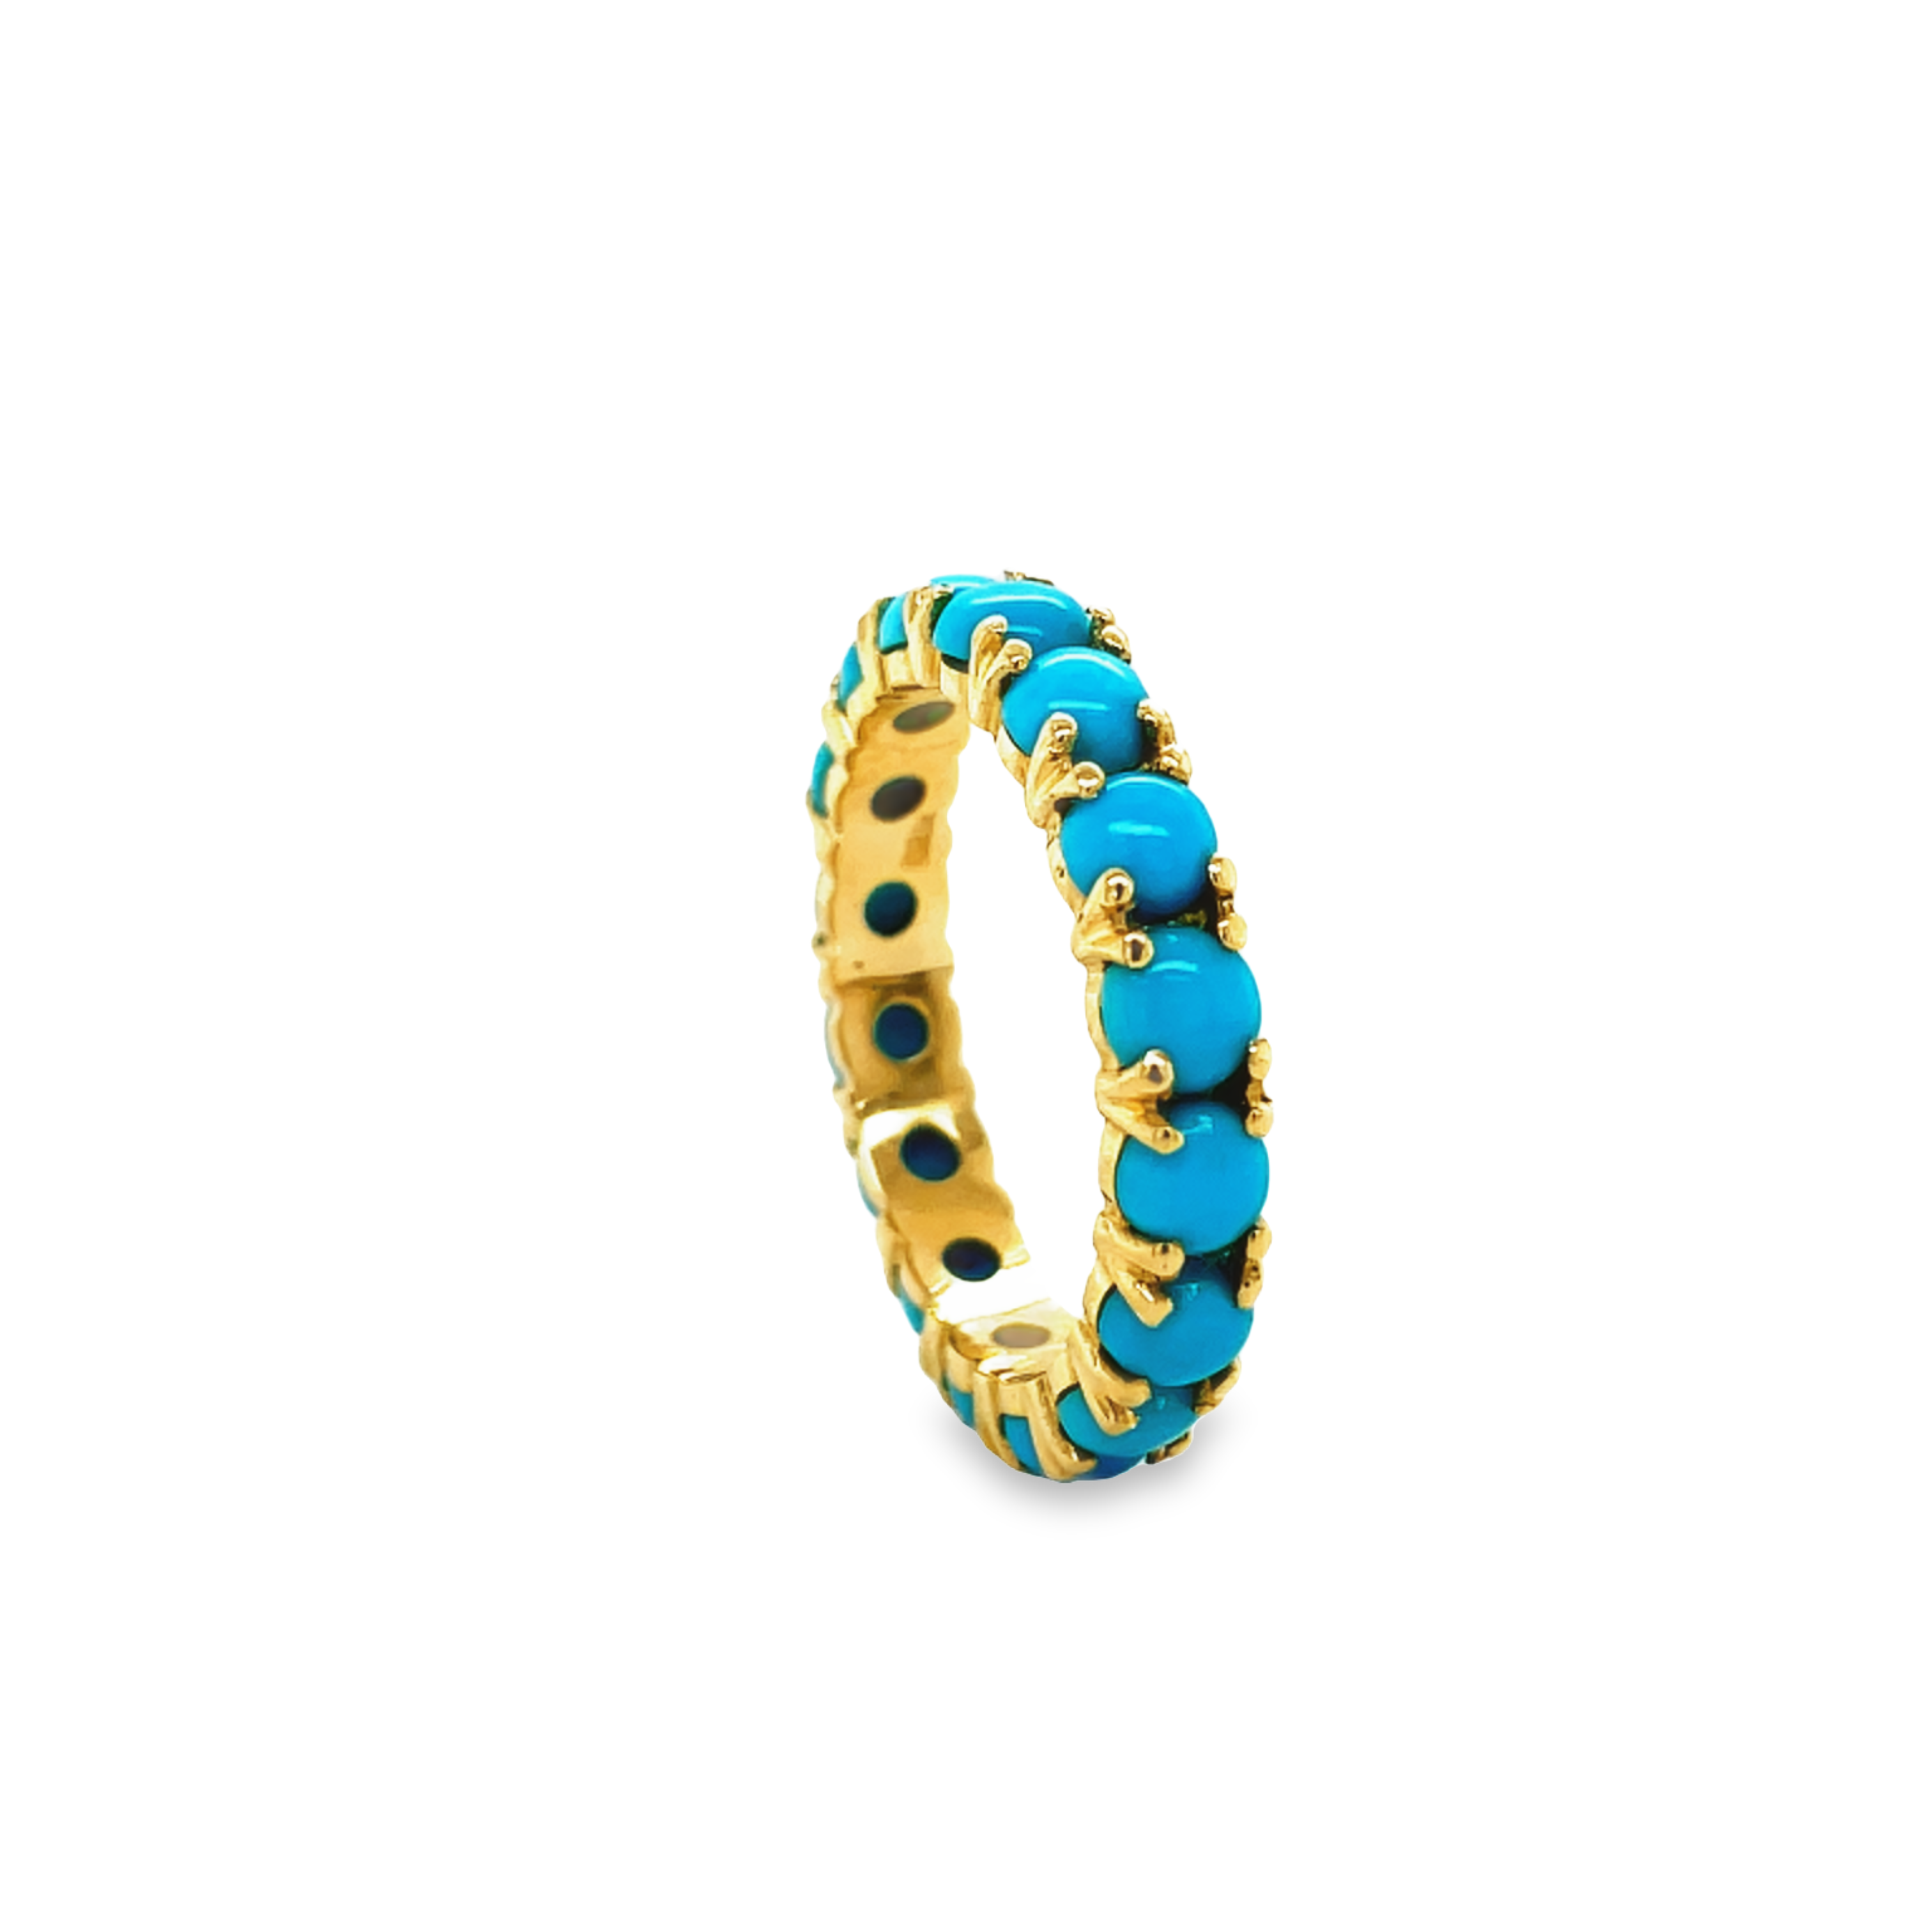 This timeless piece is crafted with genuine turquoise beads set in a 14k yellow gold band and is 4.00 mm. Its stackable feature adds versatility and elegance to your look. Size 8.